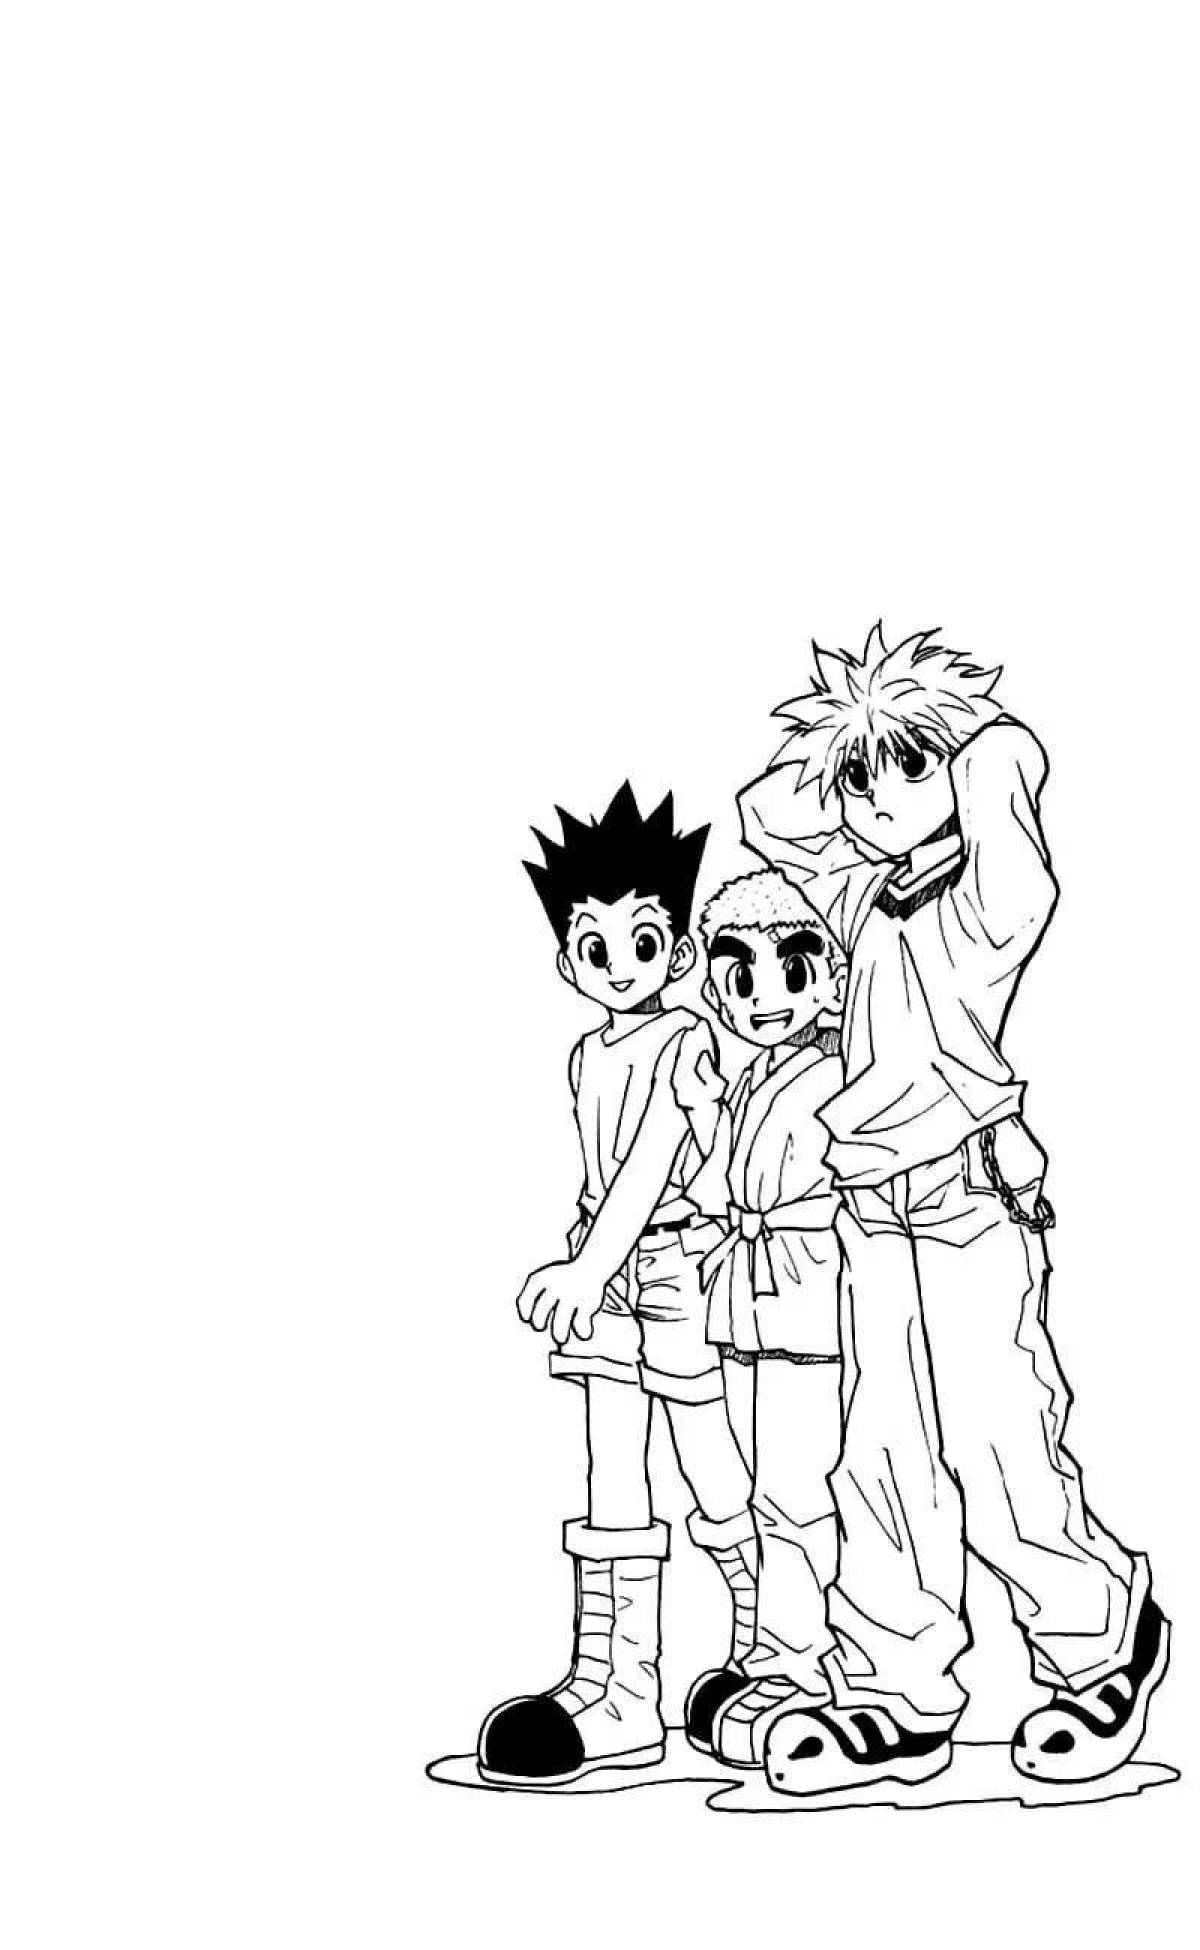 Gorgeous Killua and Gon coloring page